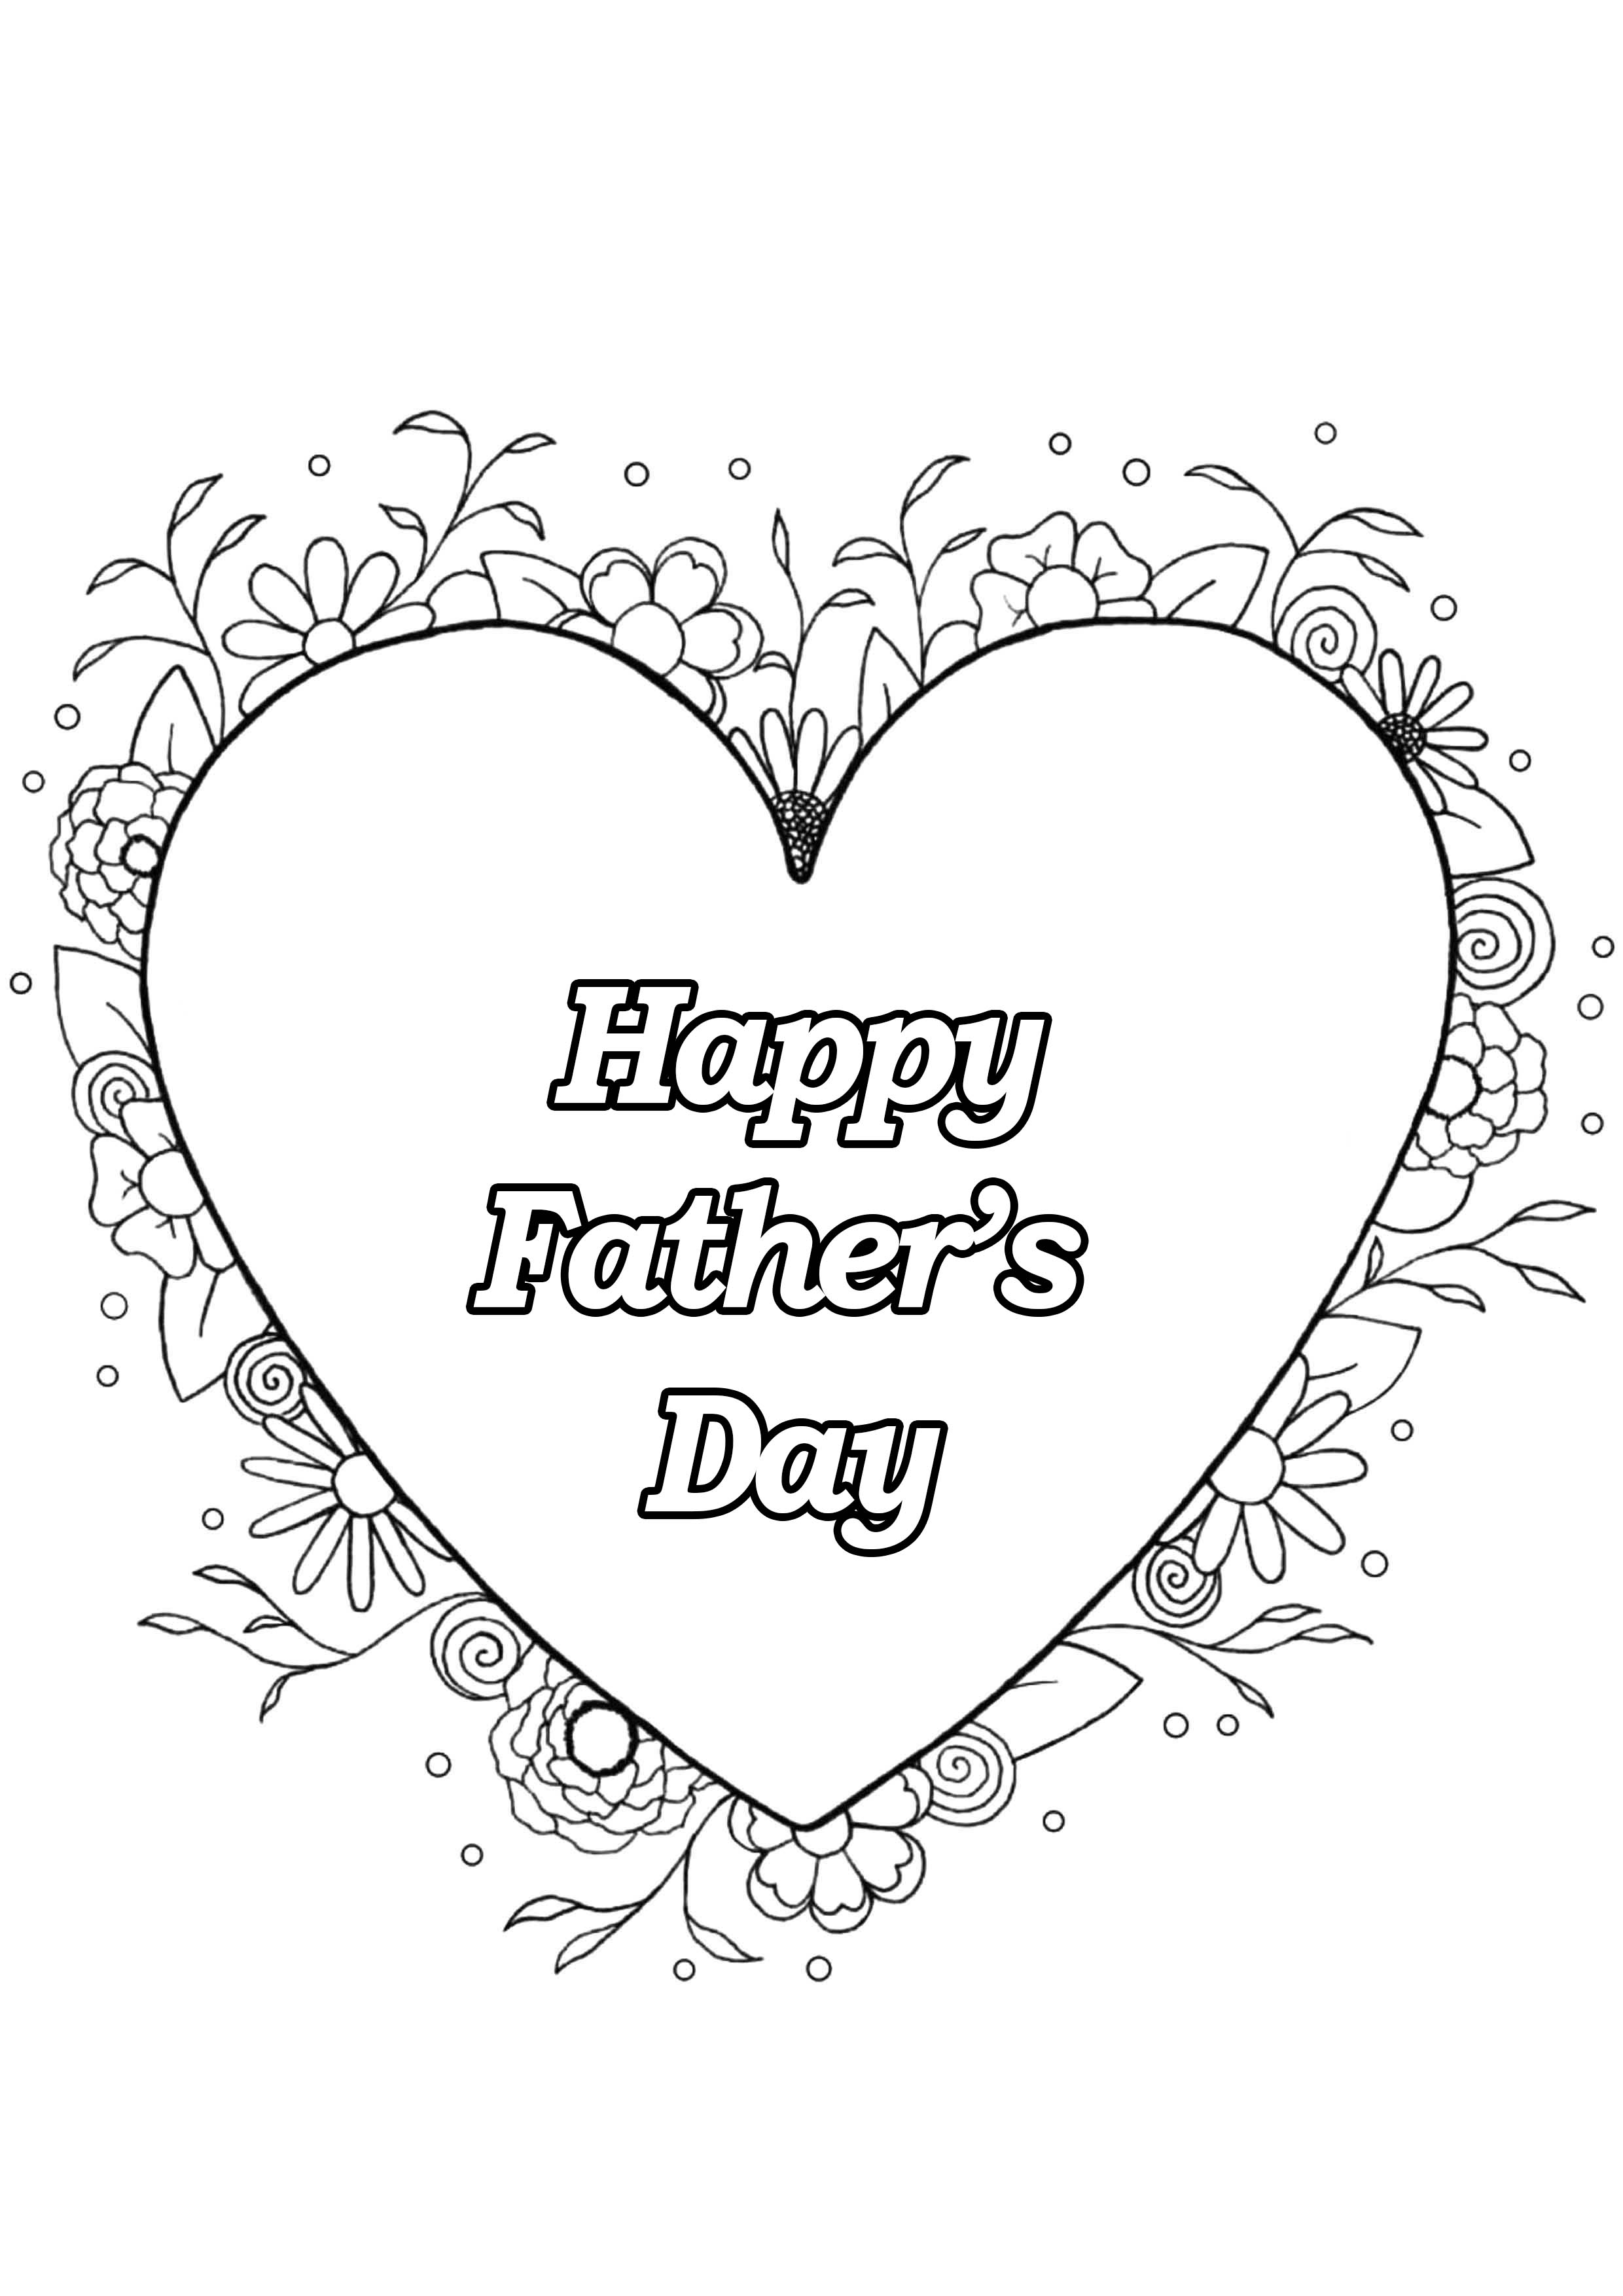 father-s-day-4-father-s-day-adult-coloring-pages